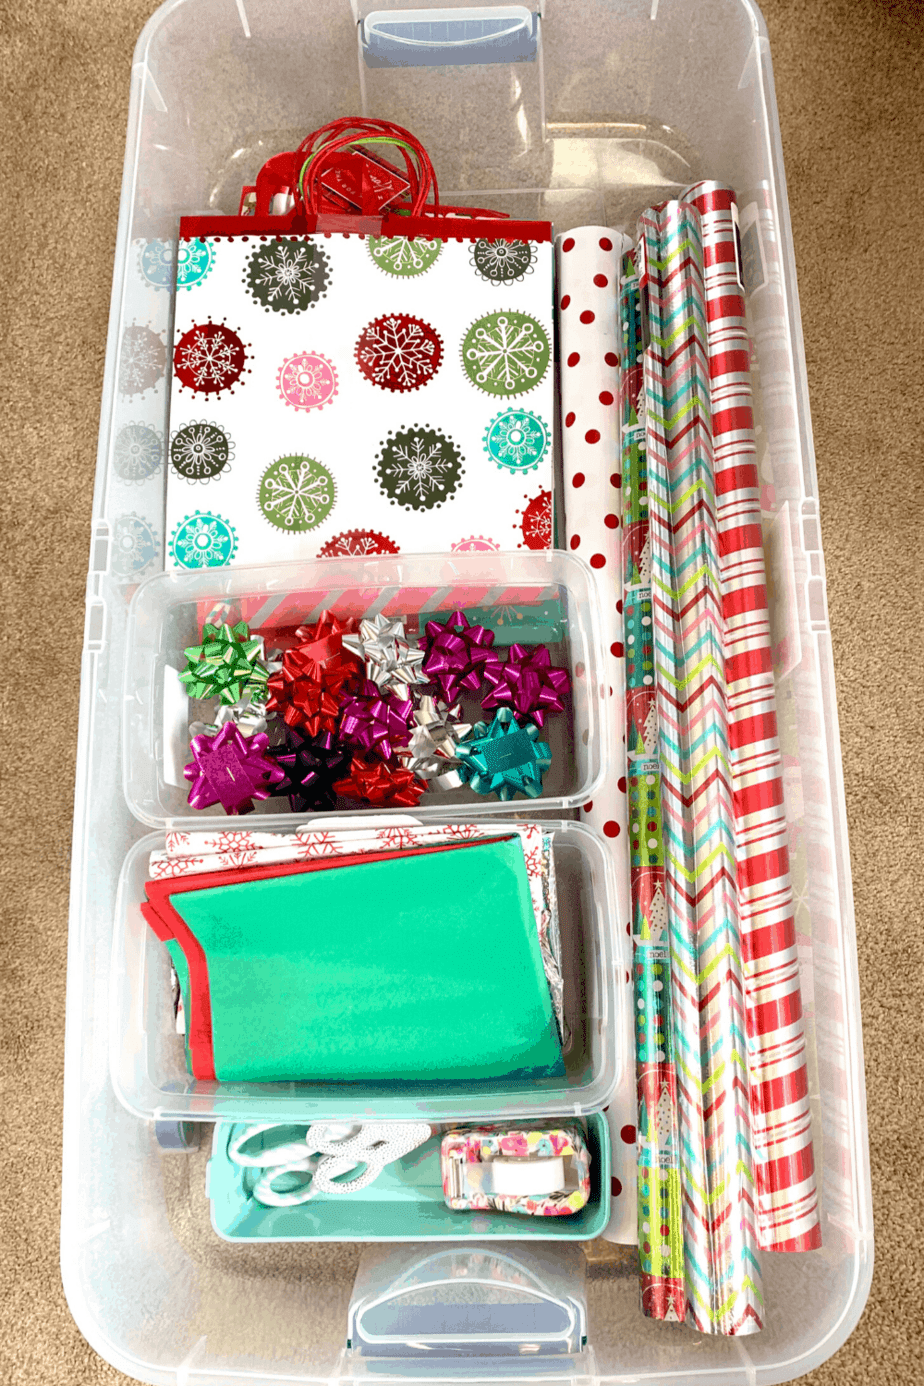 How to Organize Wrapping Paper - 15 Gift Wrap Organization Ideas